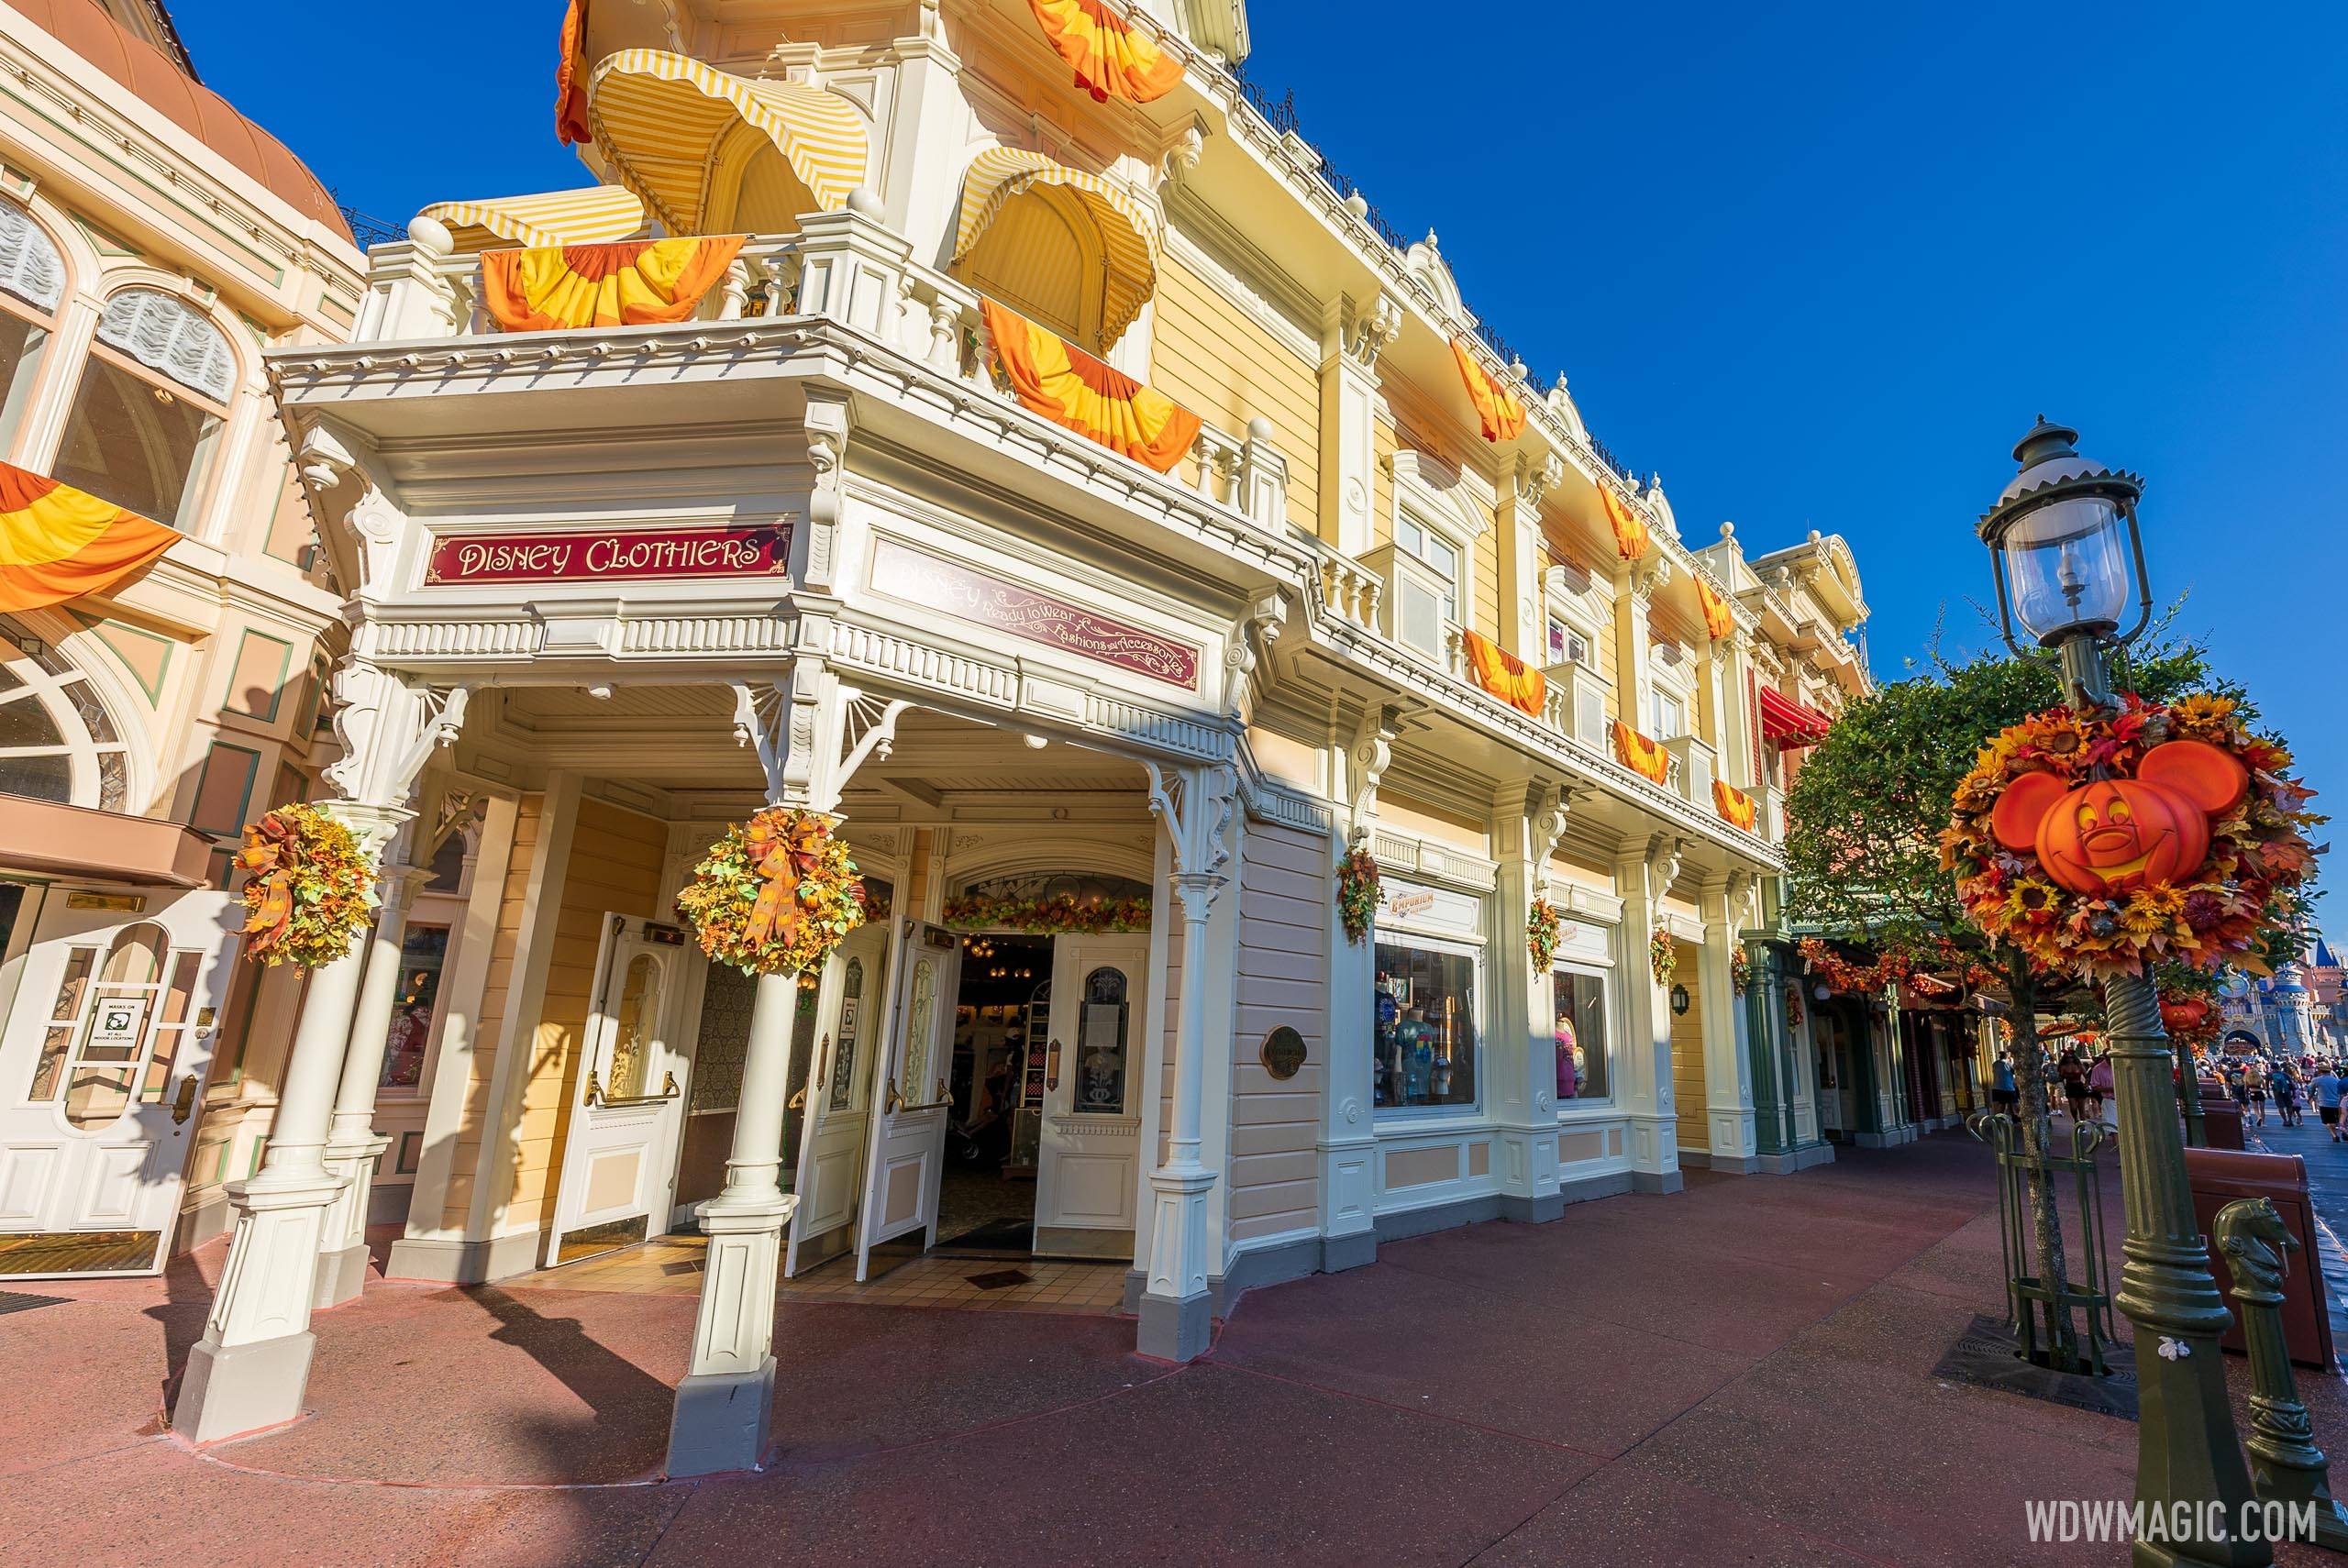 Academy of Talent Education and Training' window on Main Street U.S.A. above Disney Clothiers